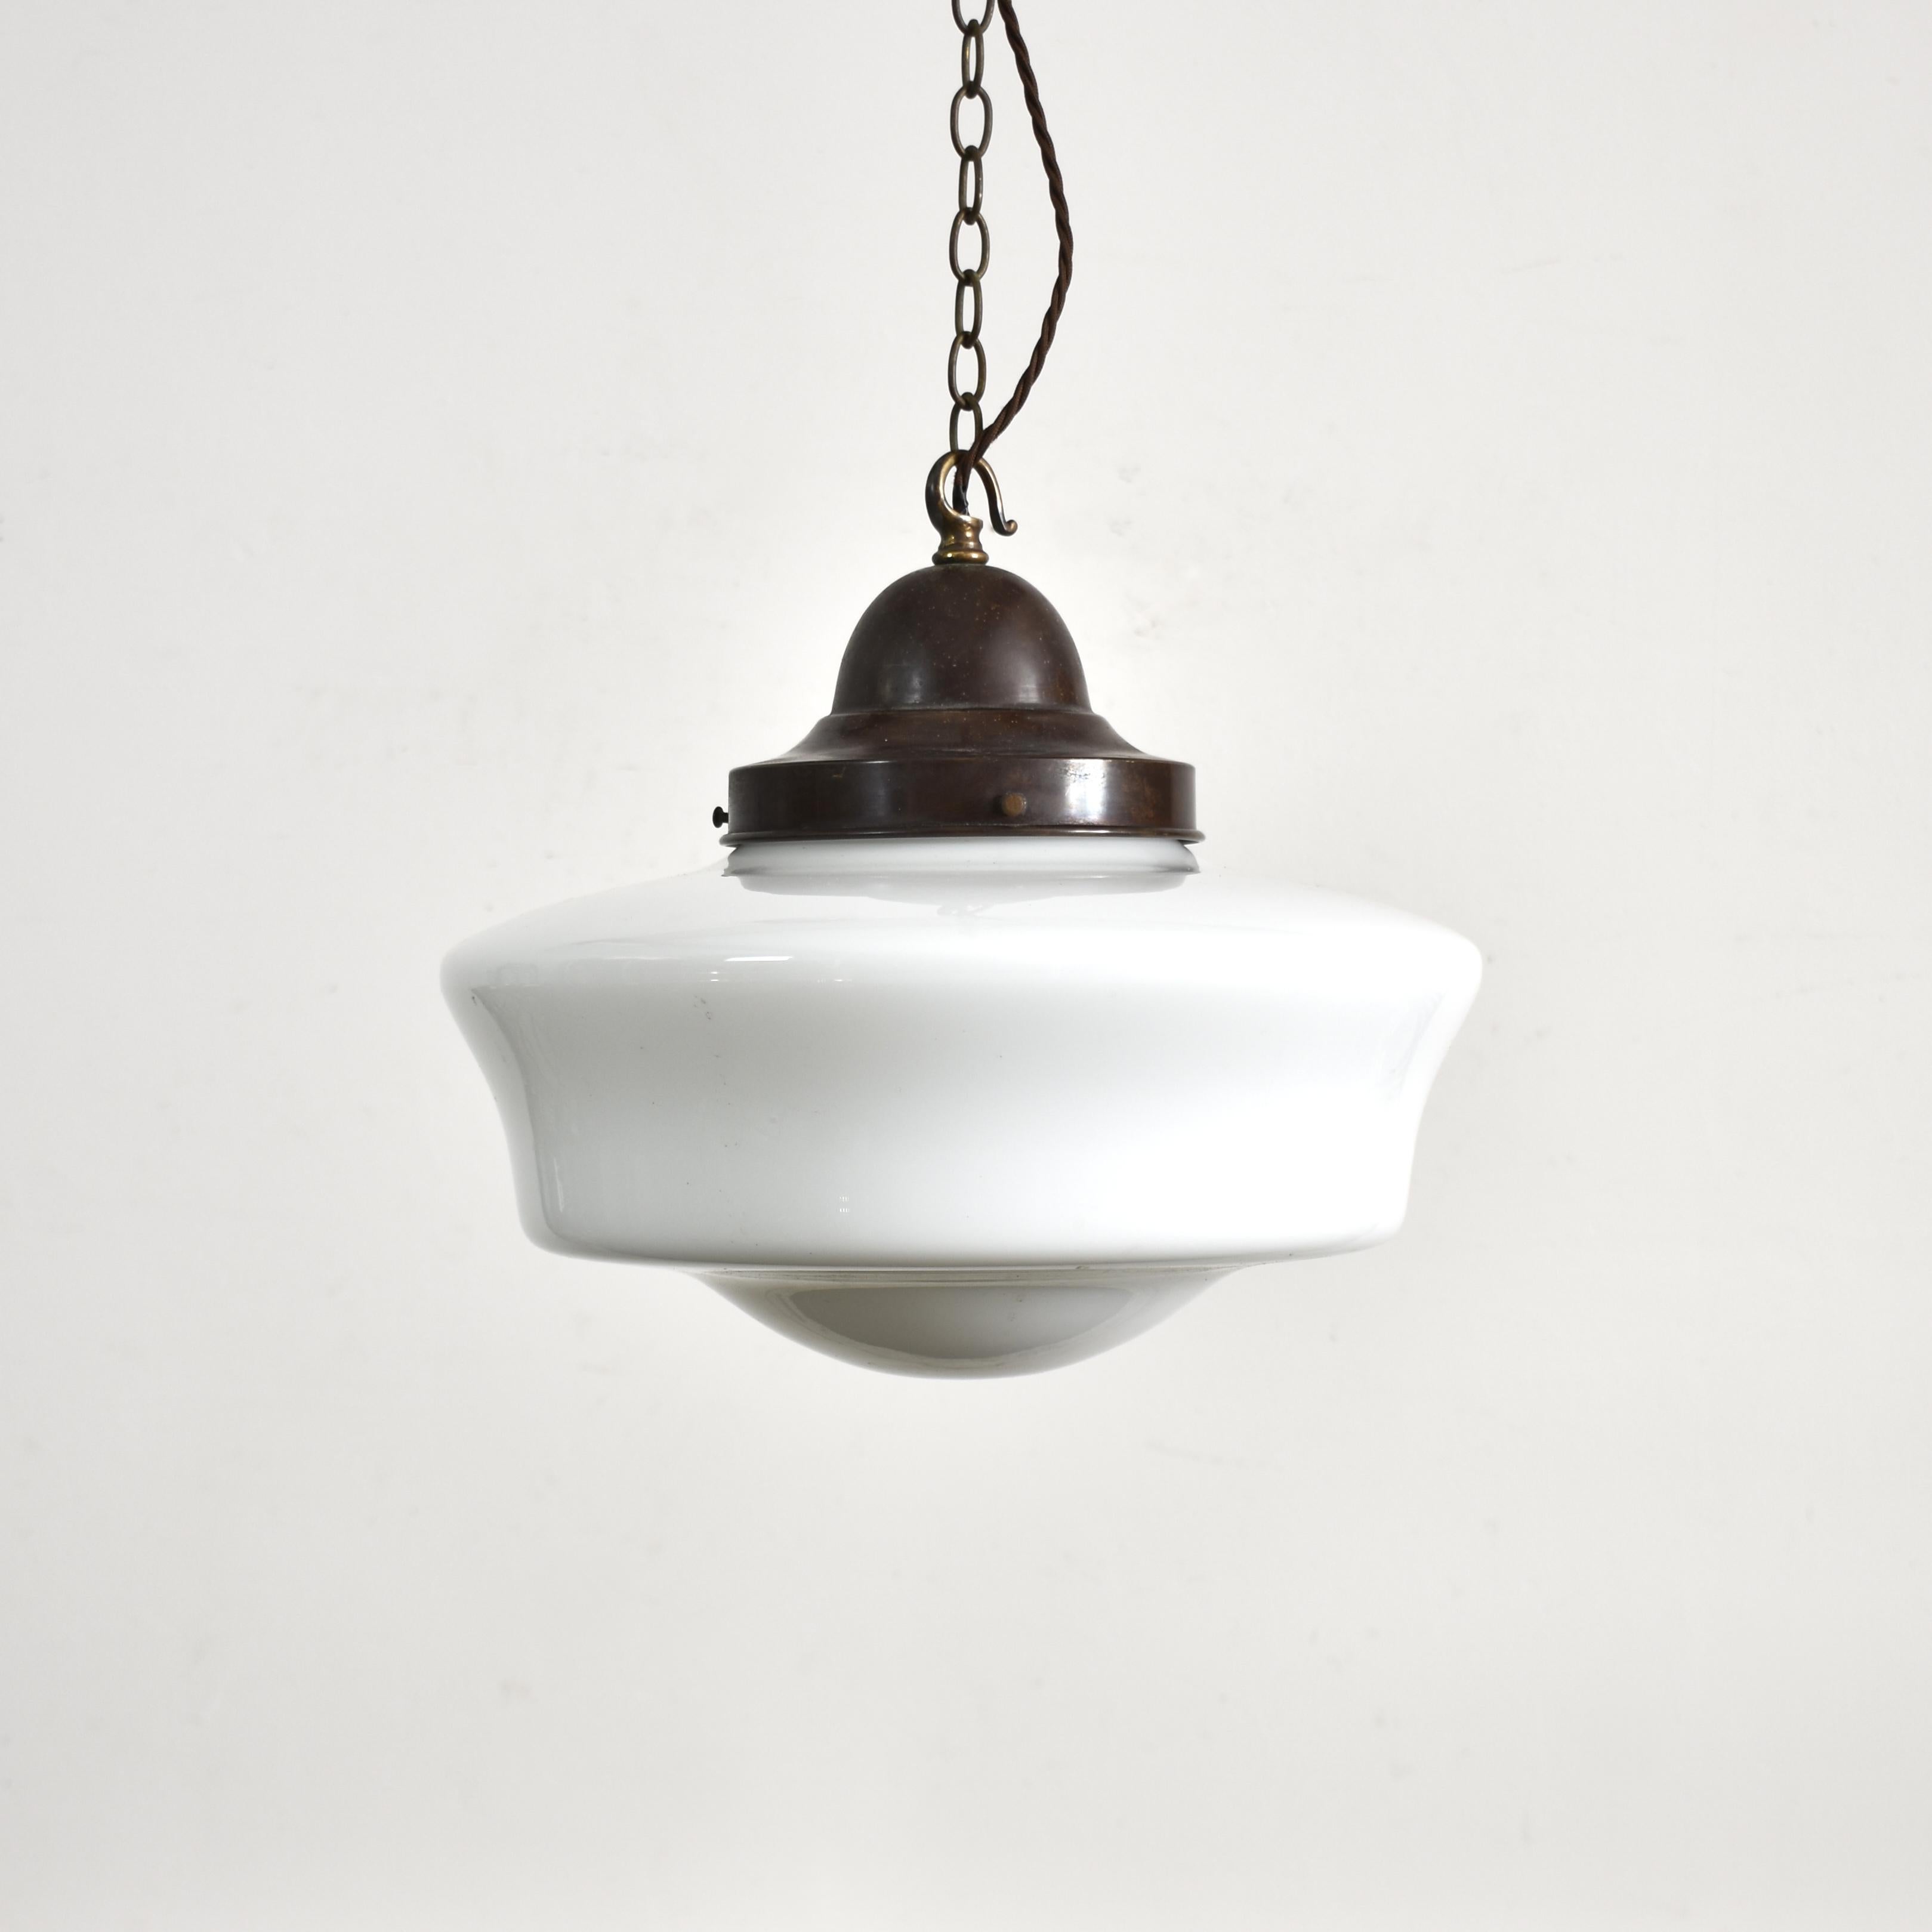 Pair of Antique Church Opaline Pendant Lights

A pair of original opaline glass pendant lights. The lights have milk glass opaline shades and original aged brass hanging galleries. The gallery finish has been left untouched in it original